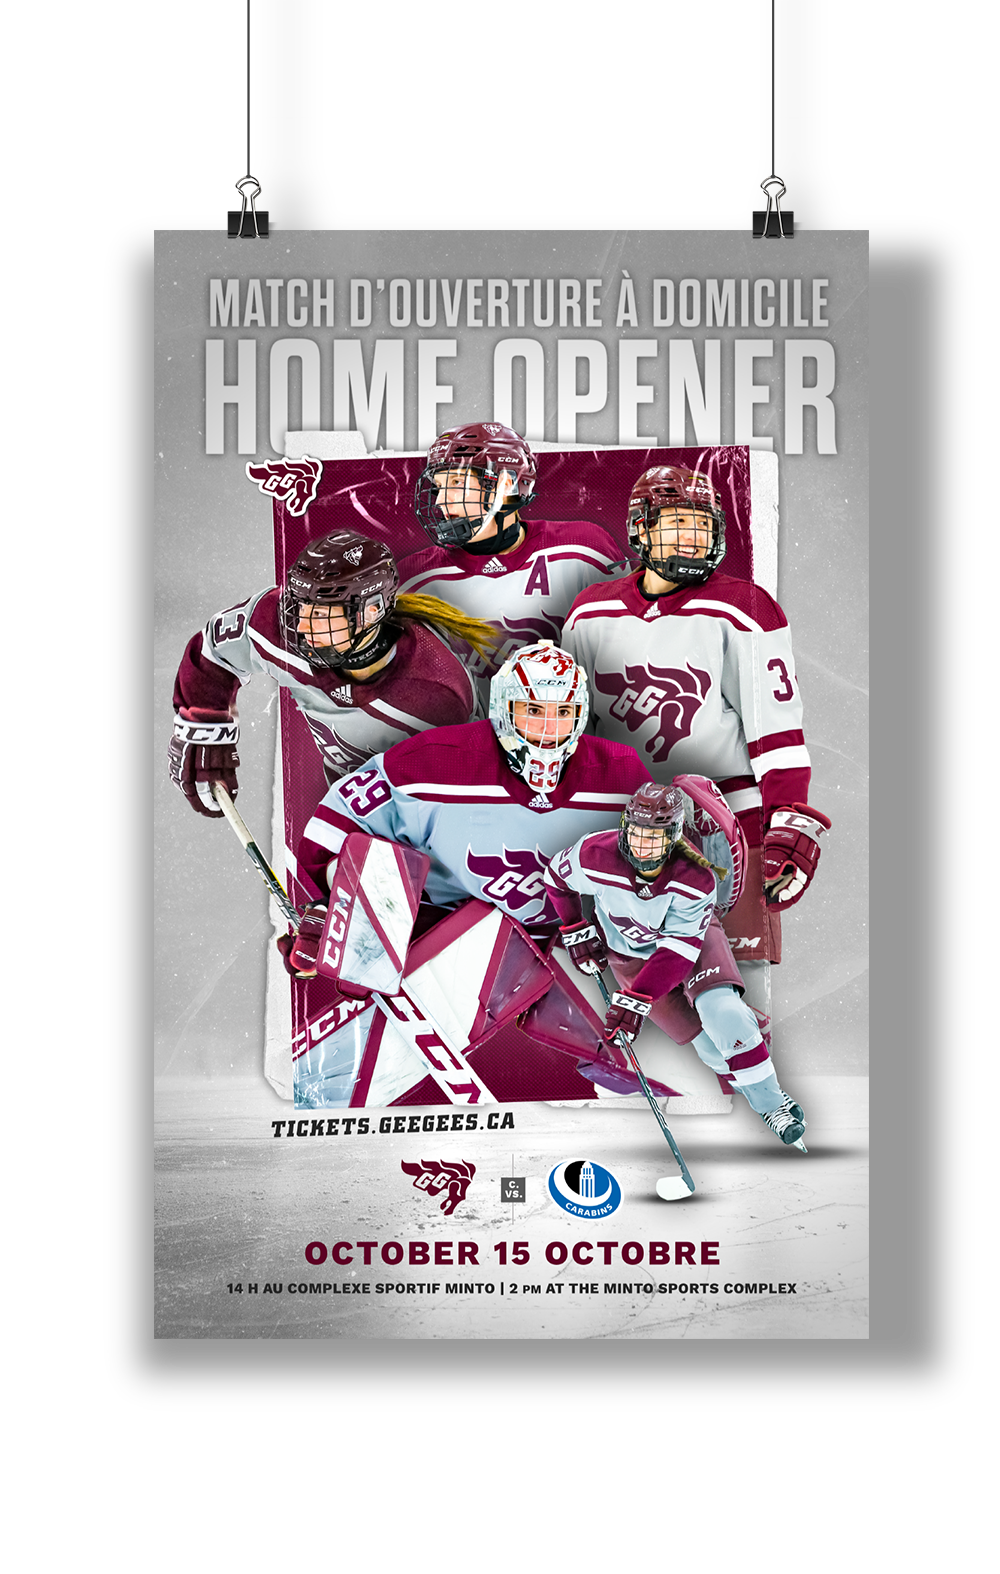 Poster promoting women's hockey game.